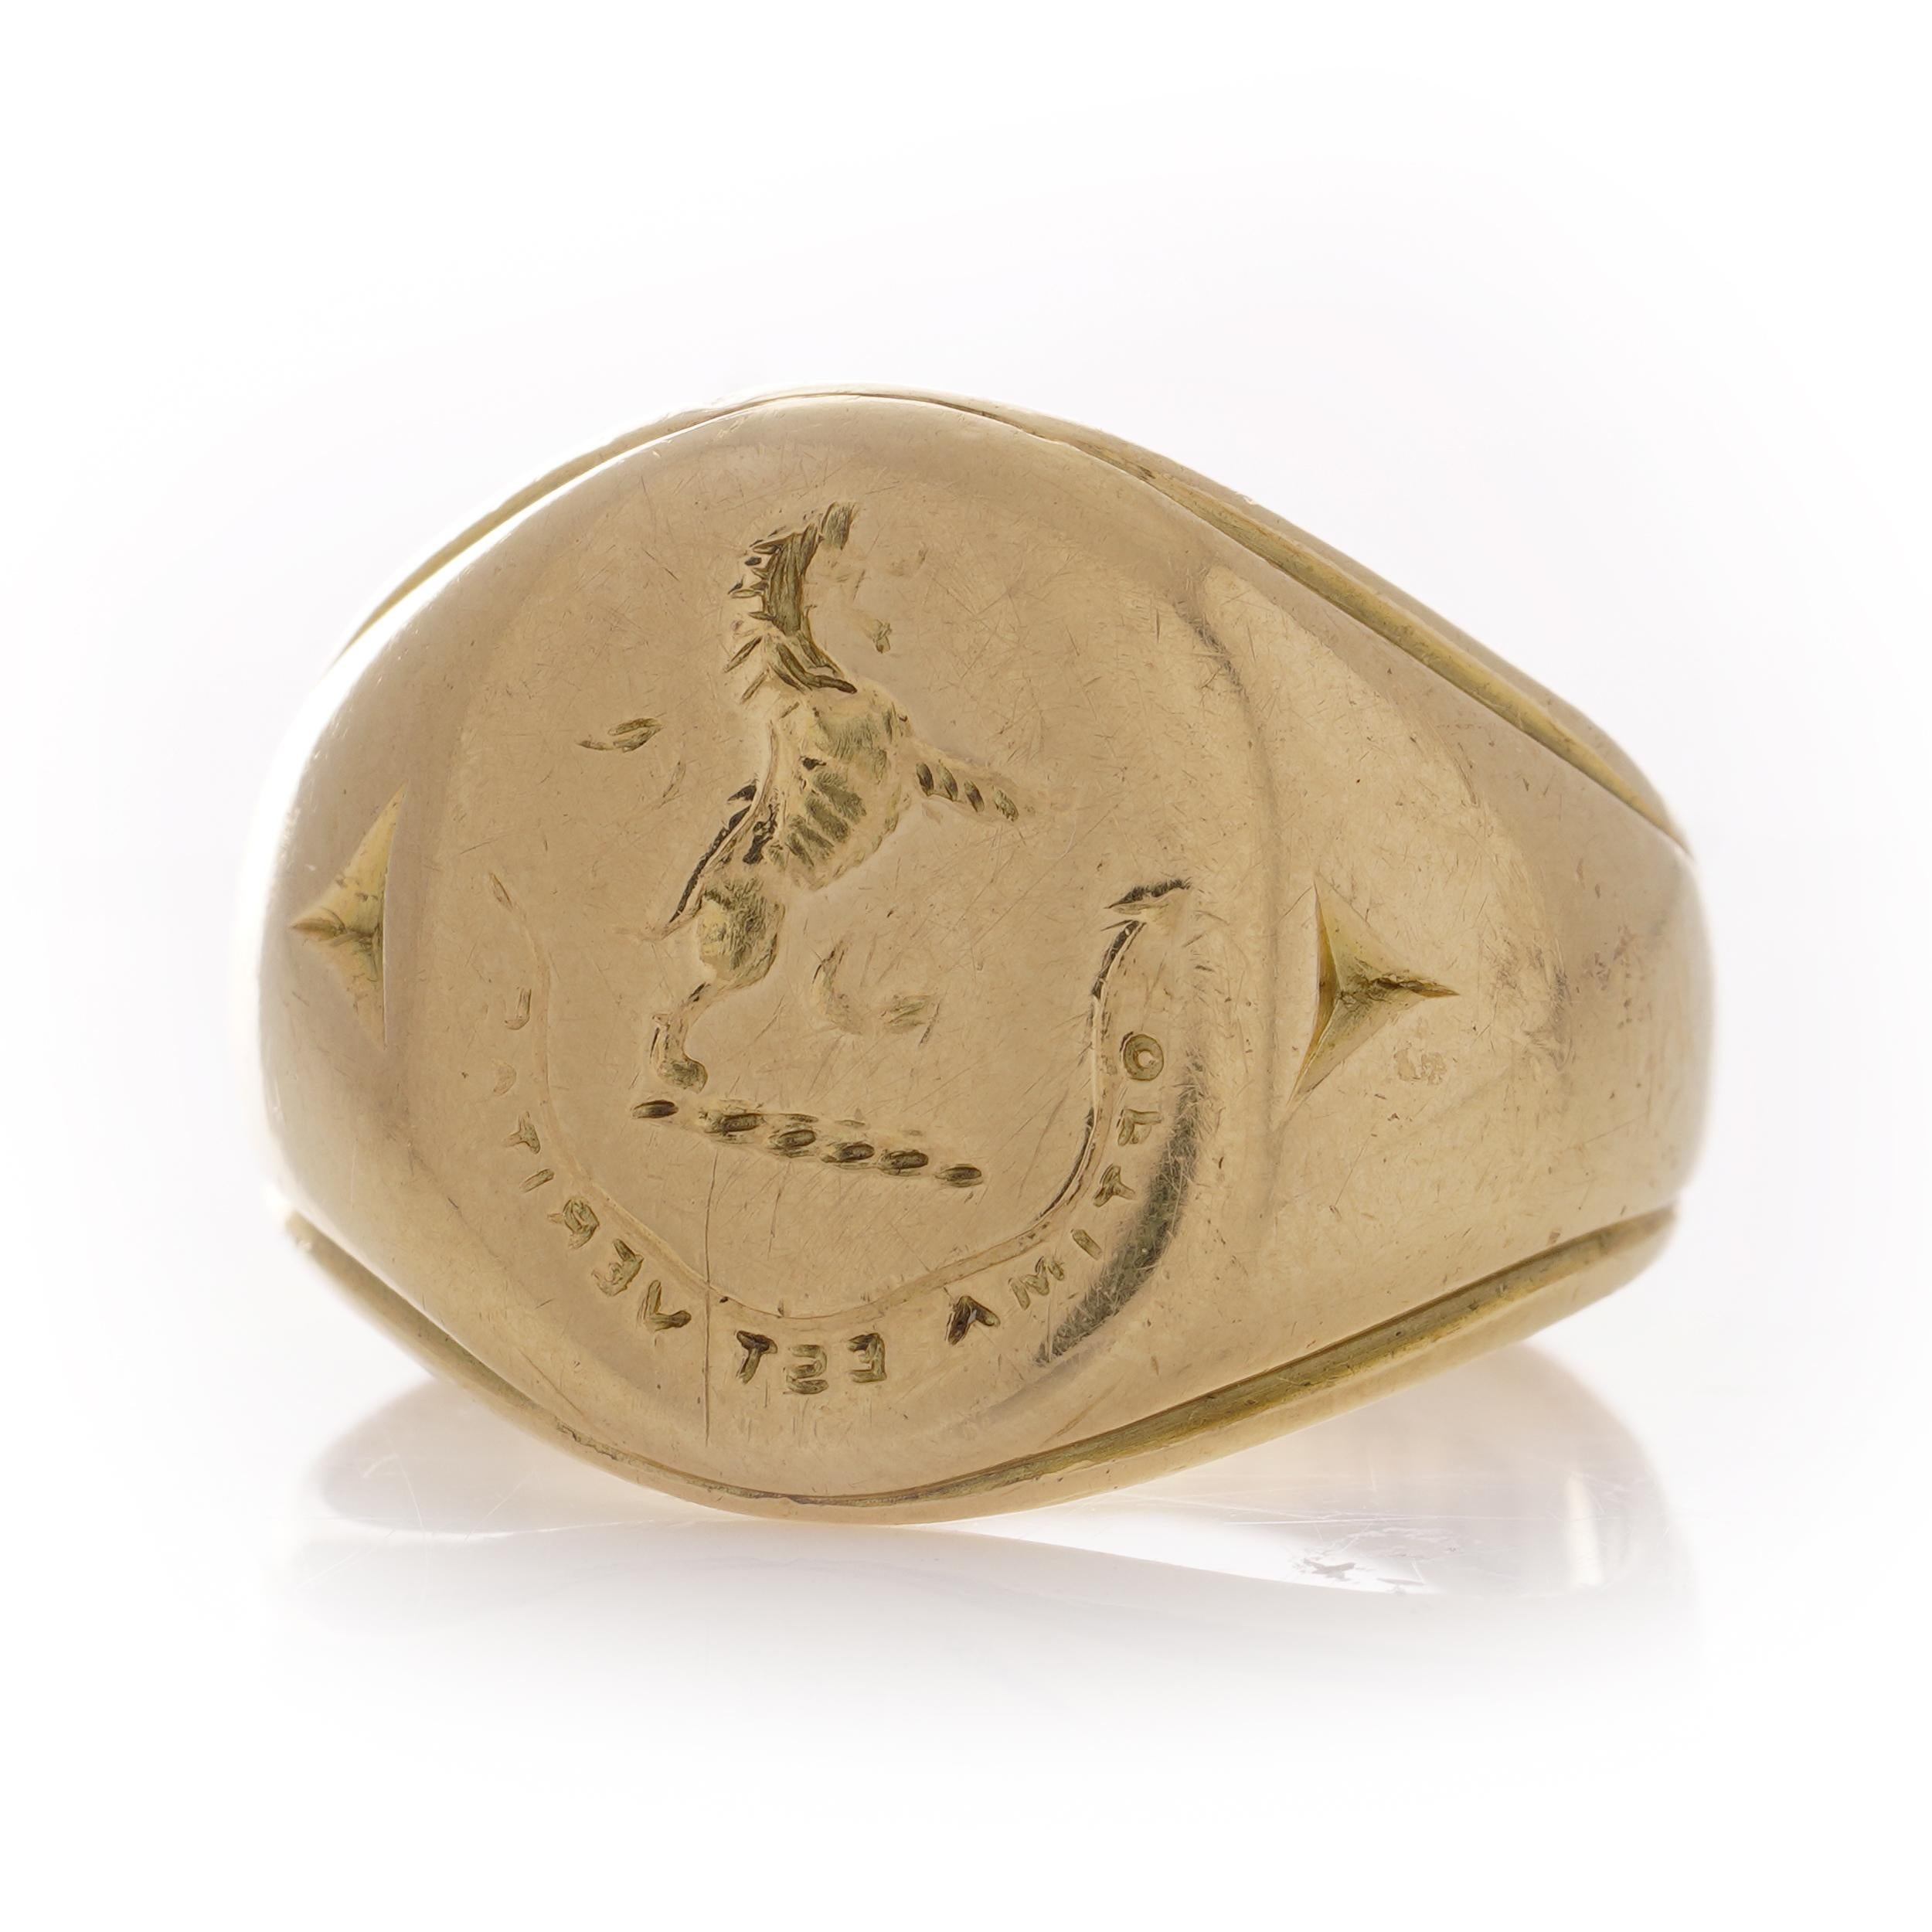 Antique 18kt. yellow gold signet ring with Rampant Lion and bellow Latin phrase ' Optima est veritas ' with English translation ' ' Truth is the best. '
Hallmarked with 18kt. gold., maker mark W.W
Dimensions -
Ring Size: 2.2 x 2.2 x 1.6 cm
Finger